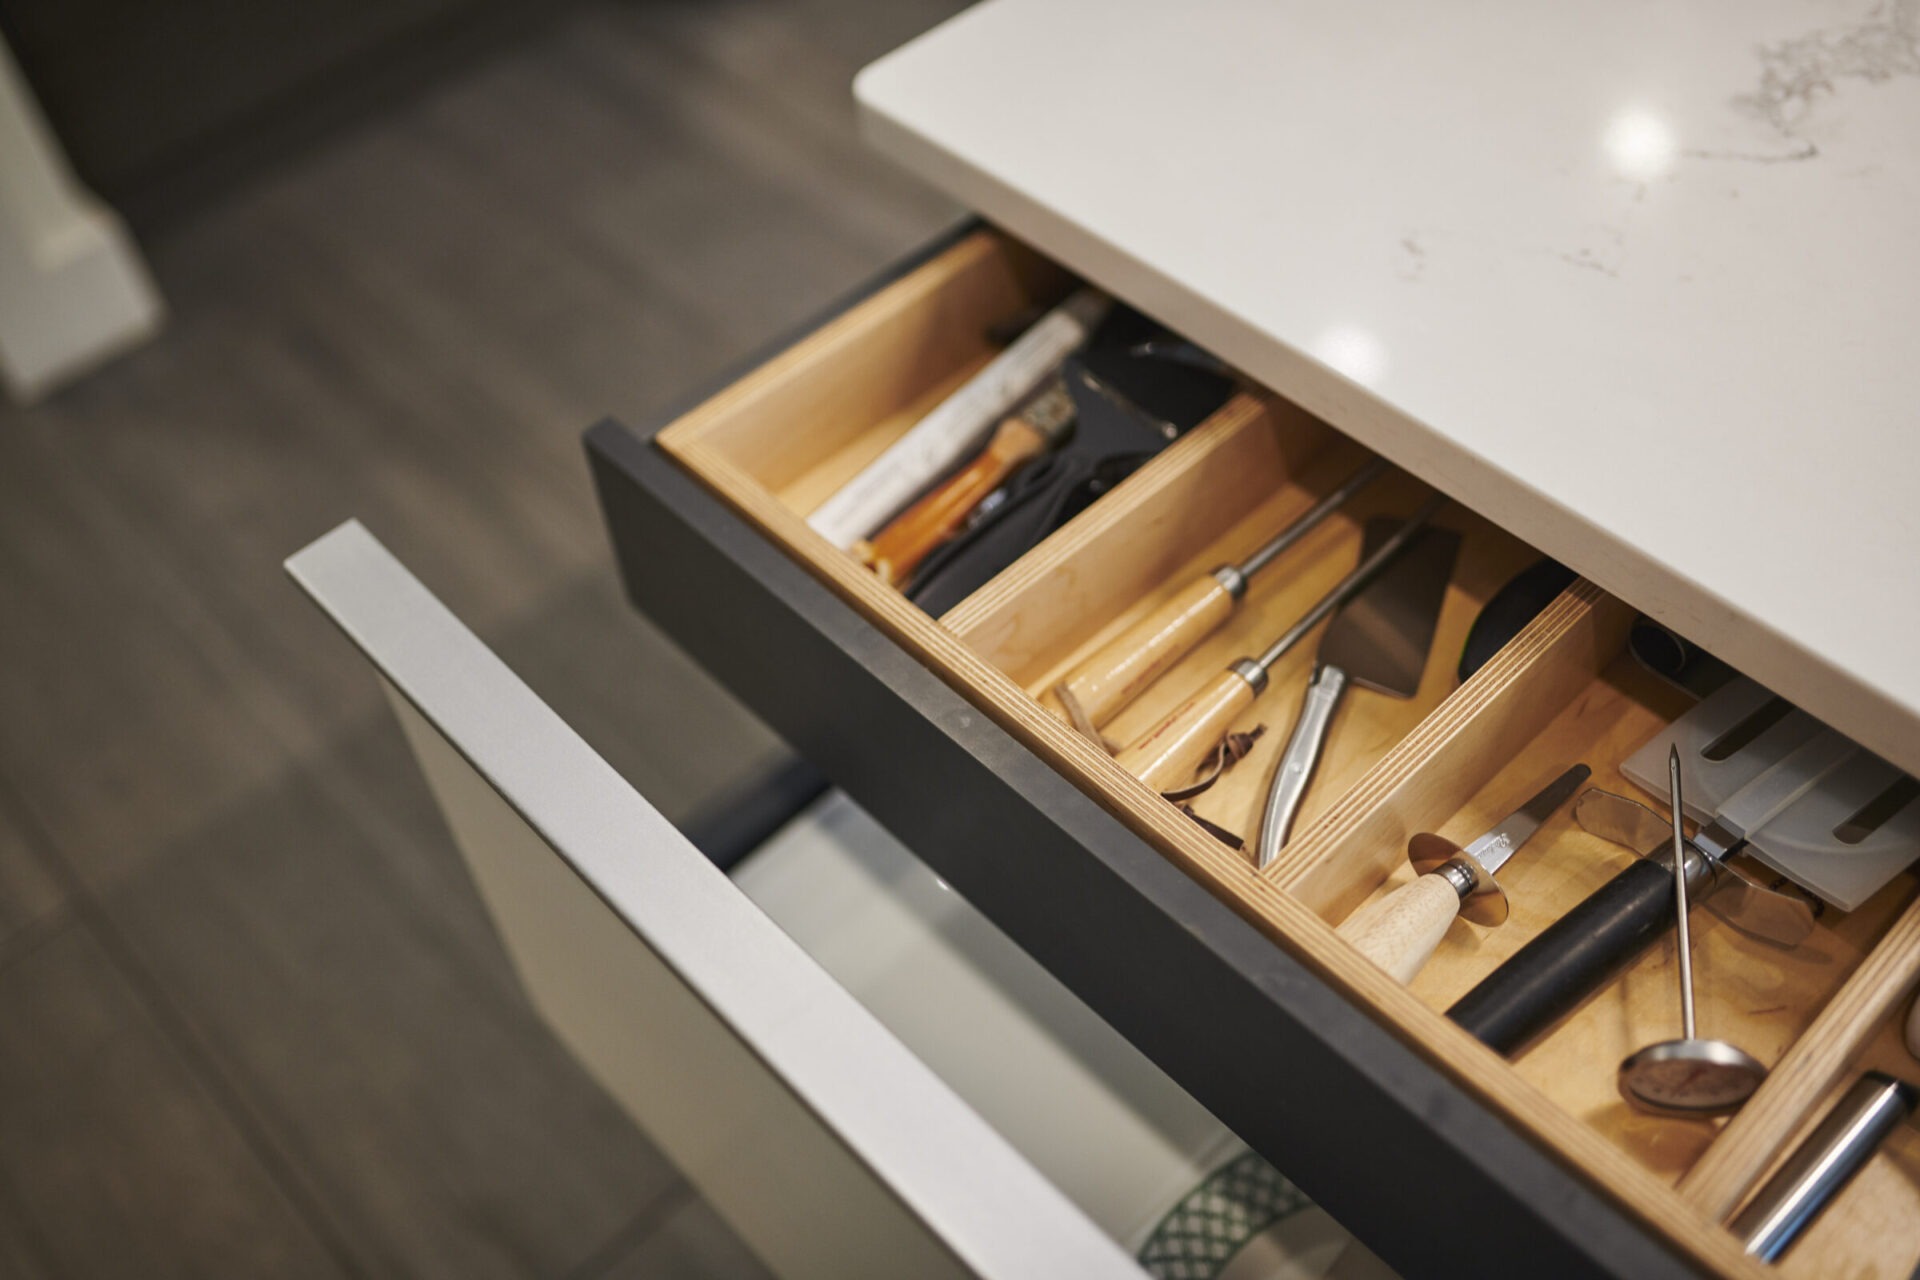 An open kitchen drawer reveals an organized array of utensils, including knives and a cheese slicer, neatly arranged in wooden dividers on a countertop.